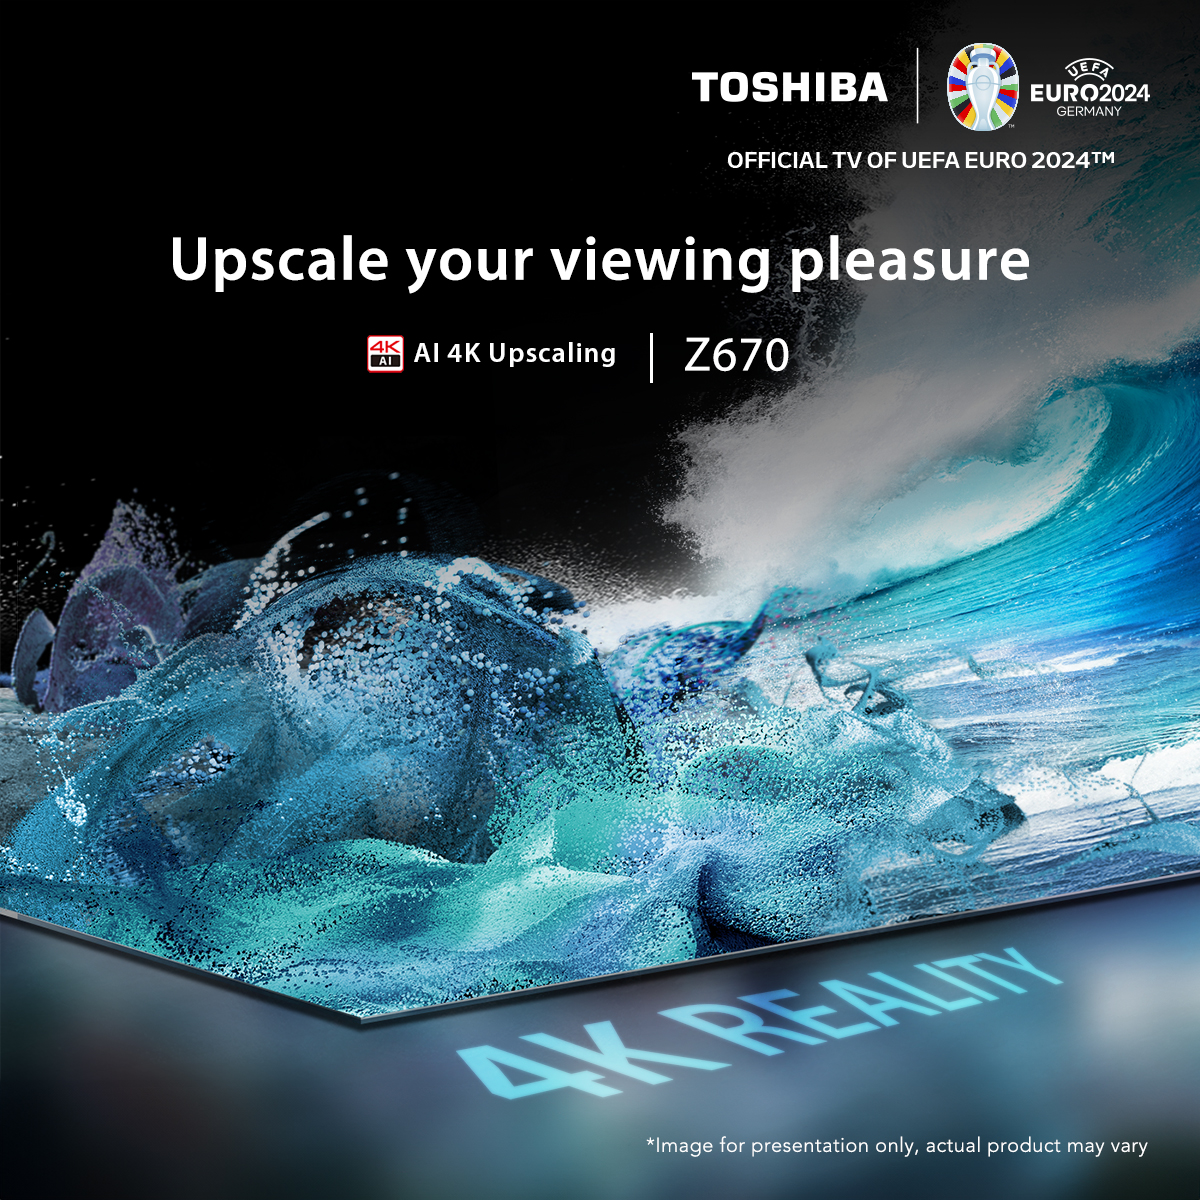 Up the ante with the power of AI 4K-Upscaling. No matter its original quality, #ToshibaTV details every pixel for lifelike depth and vibrancy.